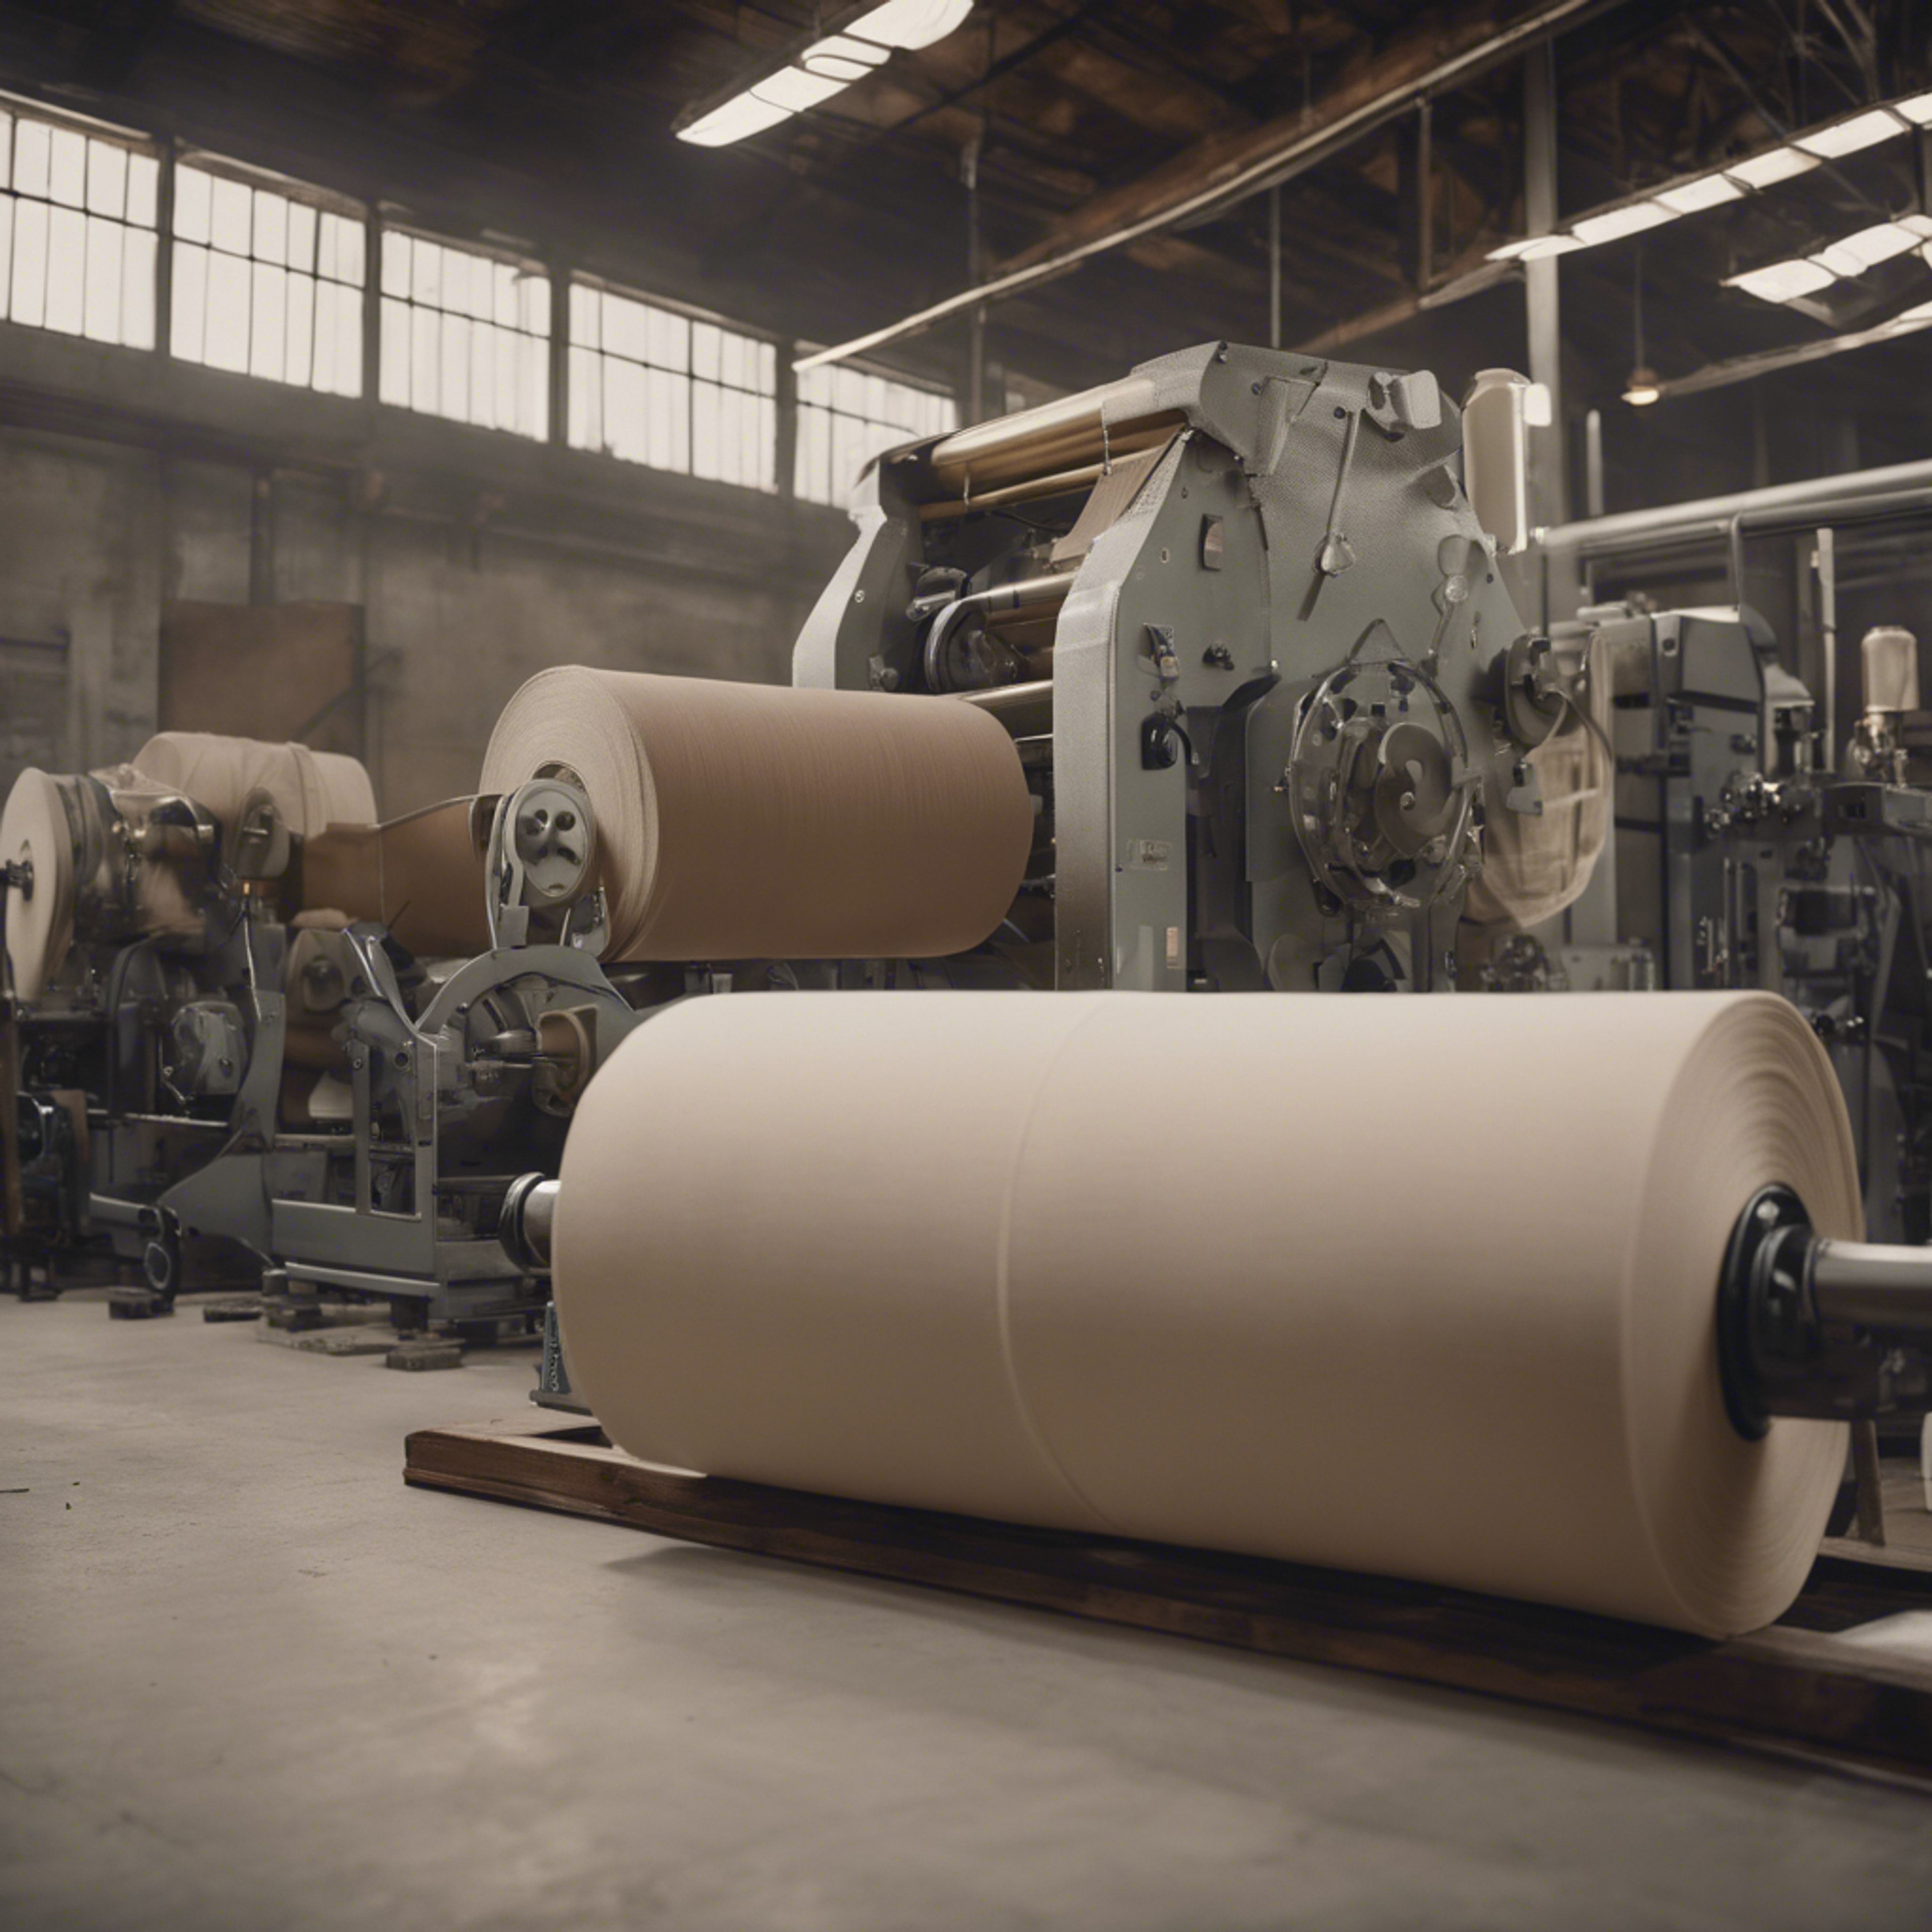 A behind the scenes shot of a linen mill with large rolls of neutral-toned fabric. Kertas dinding[c00f9cec885f4ef7a035]